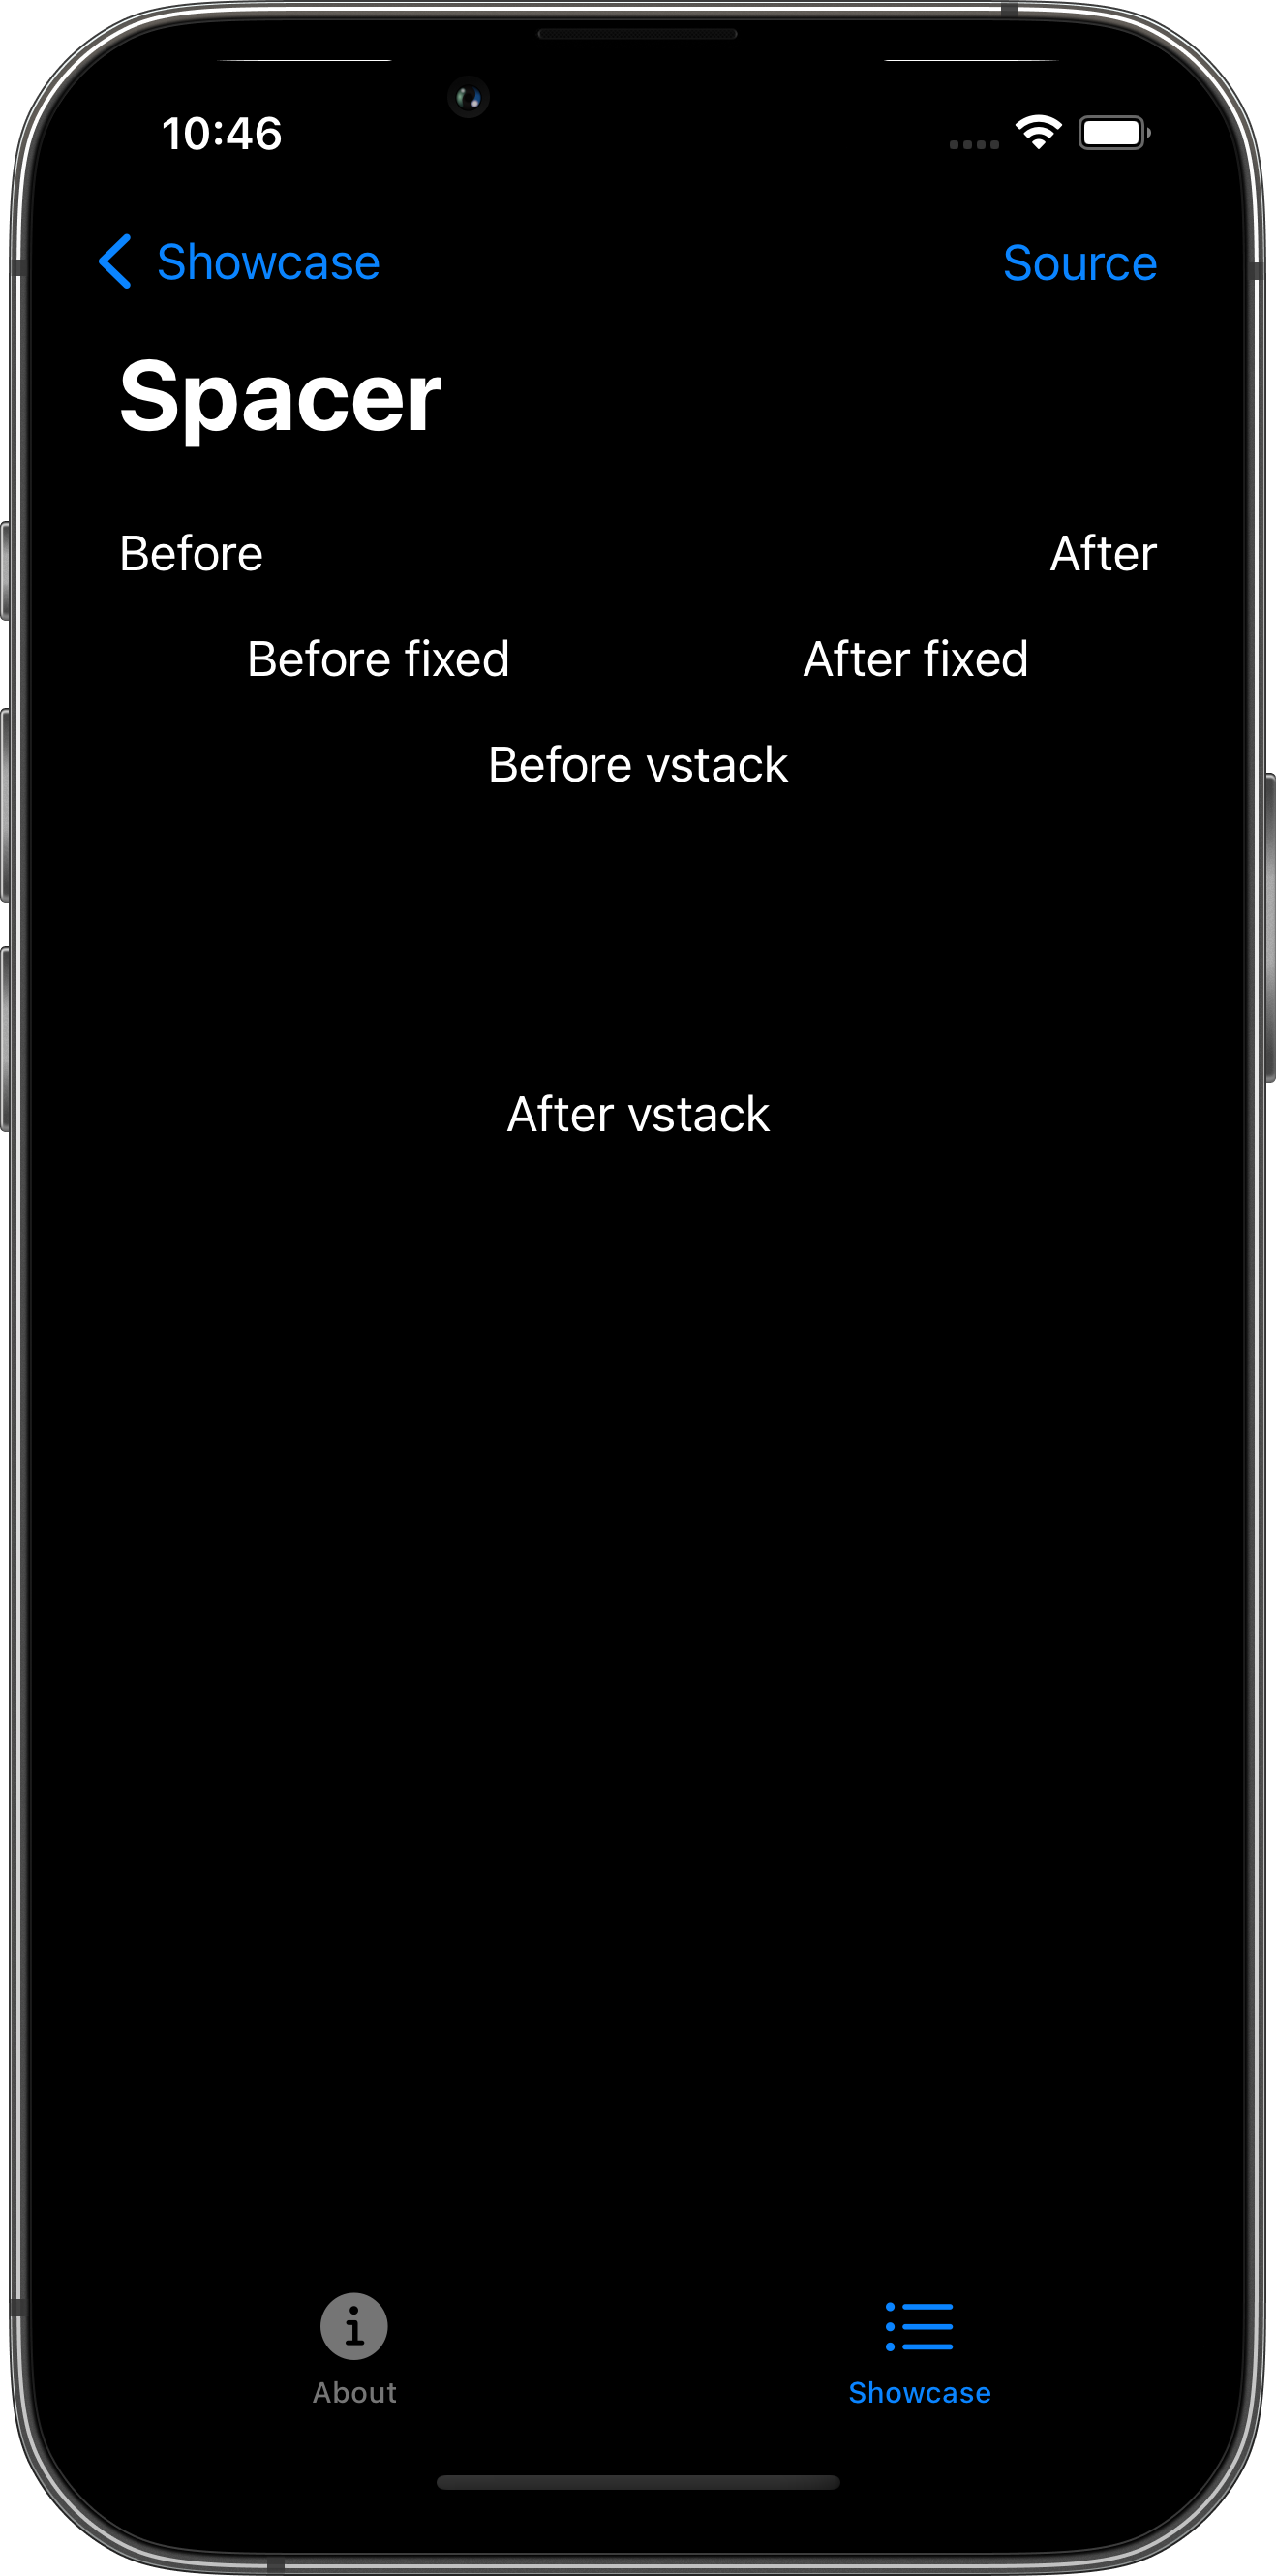 iPhone screenshot for Spacer component (dark mode)